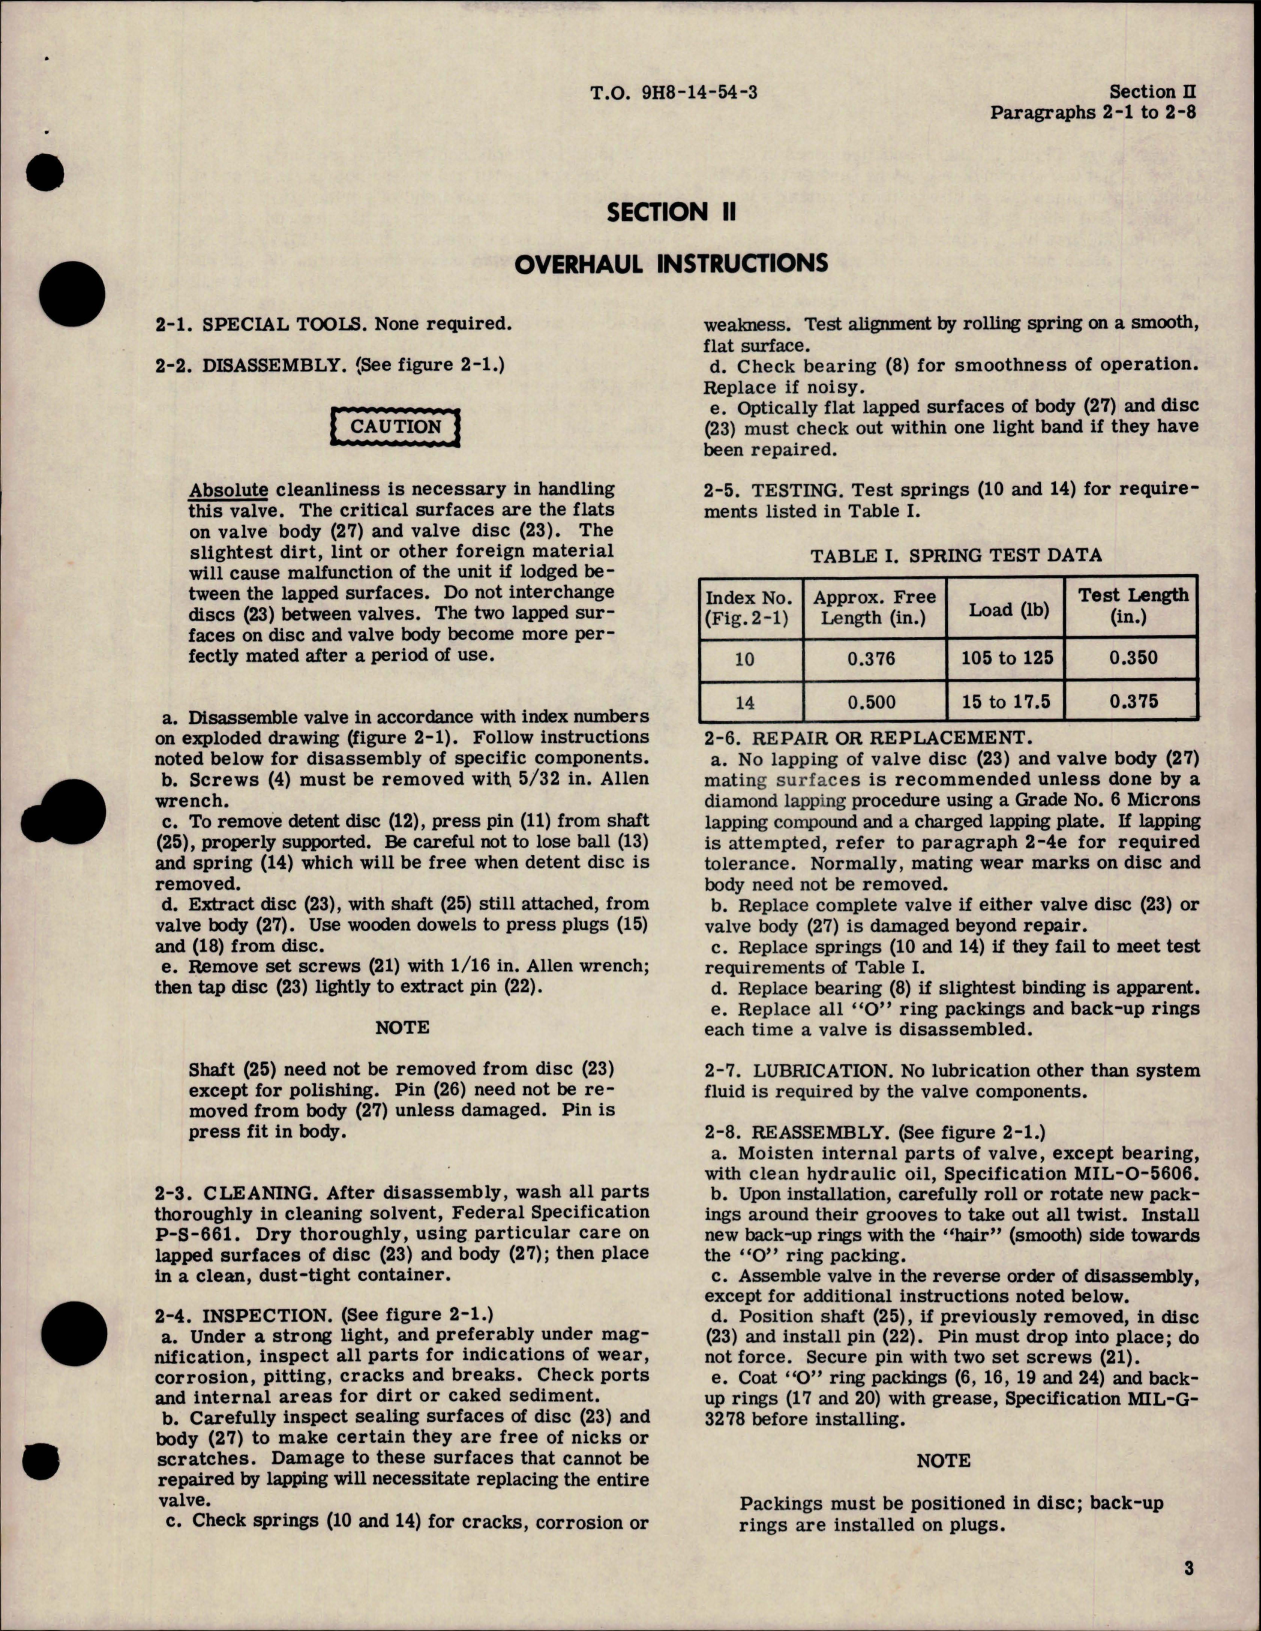 Sample page 5 from AirCorps Library document: Overhaul Instructions for Manually Operated Hydraulic Four-Way Selector Valves 